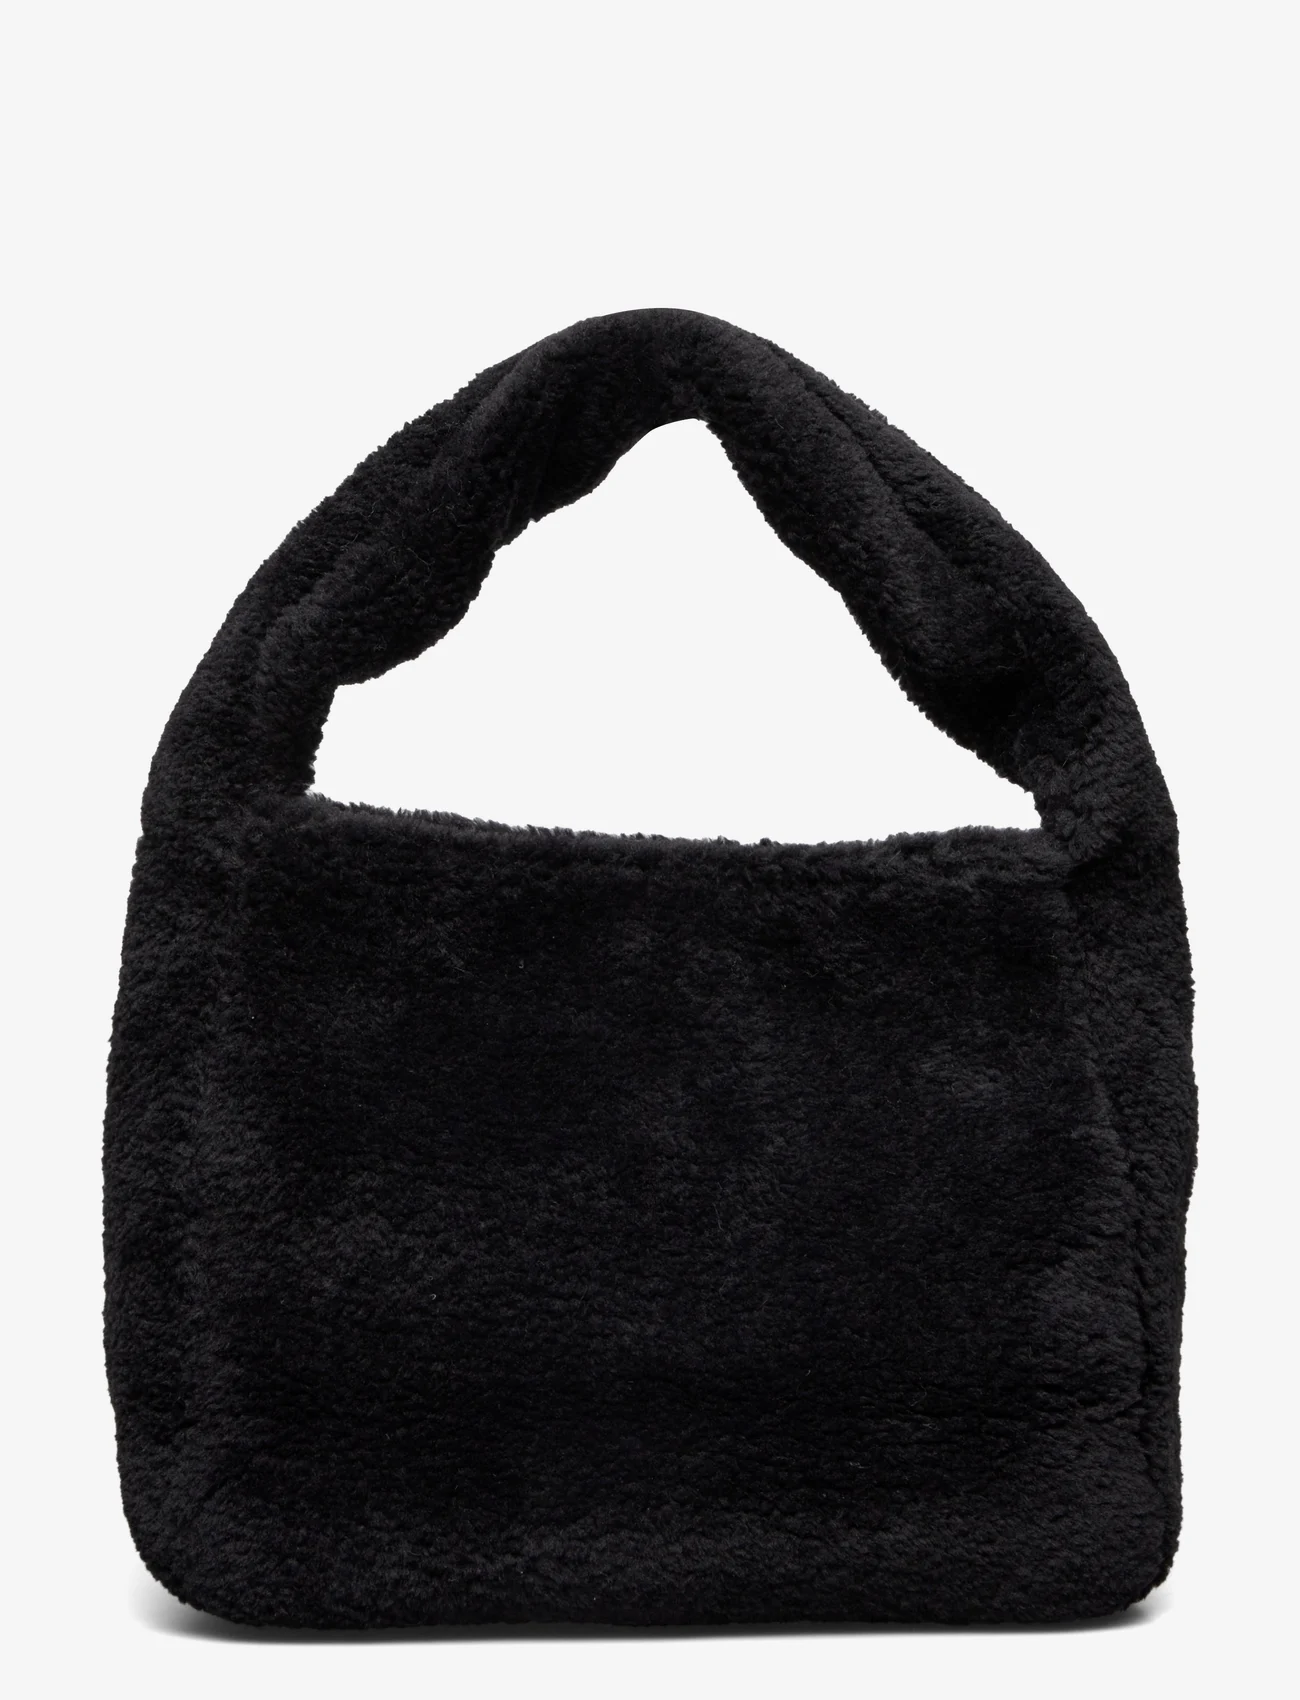 DAY ET - Day Teddy Tote - torby tote - black - 1